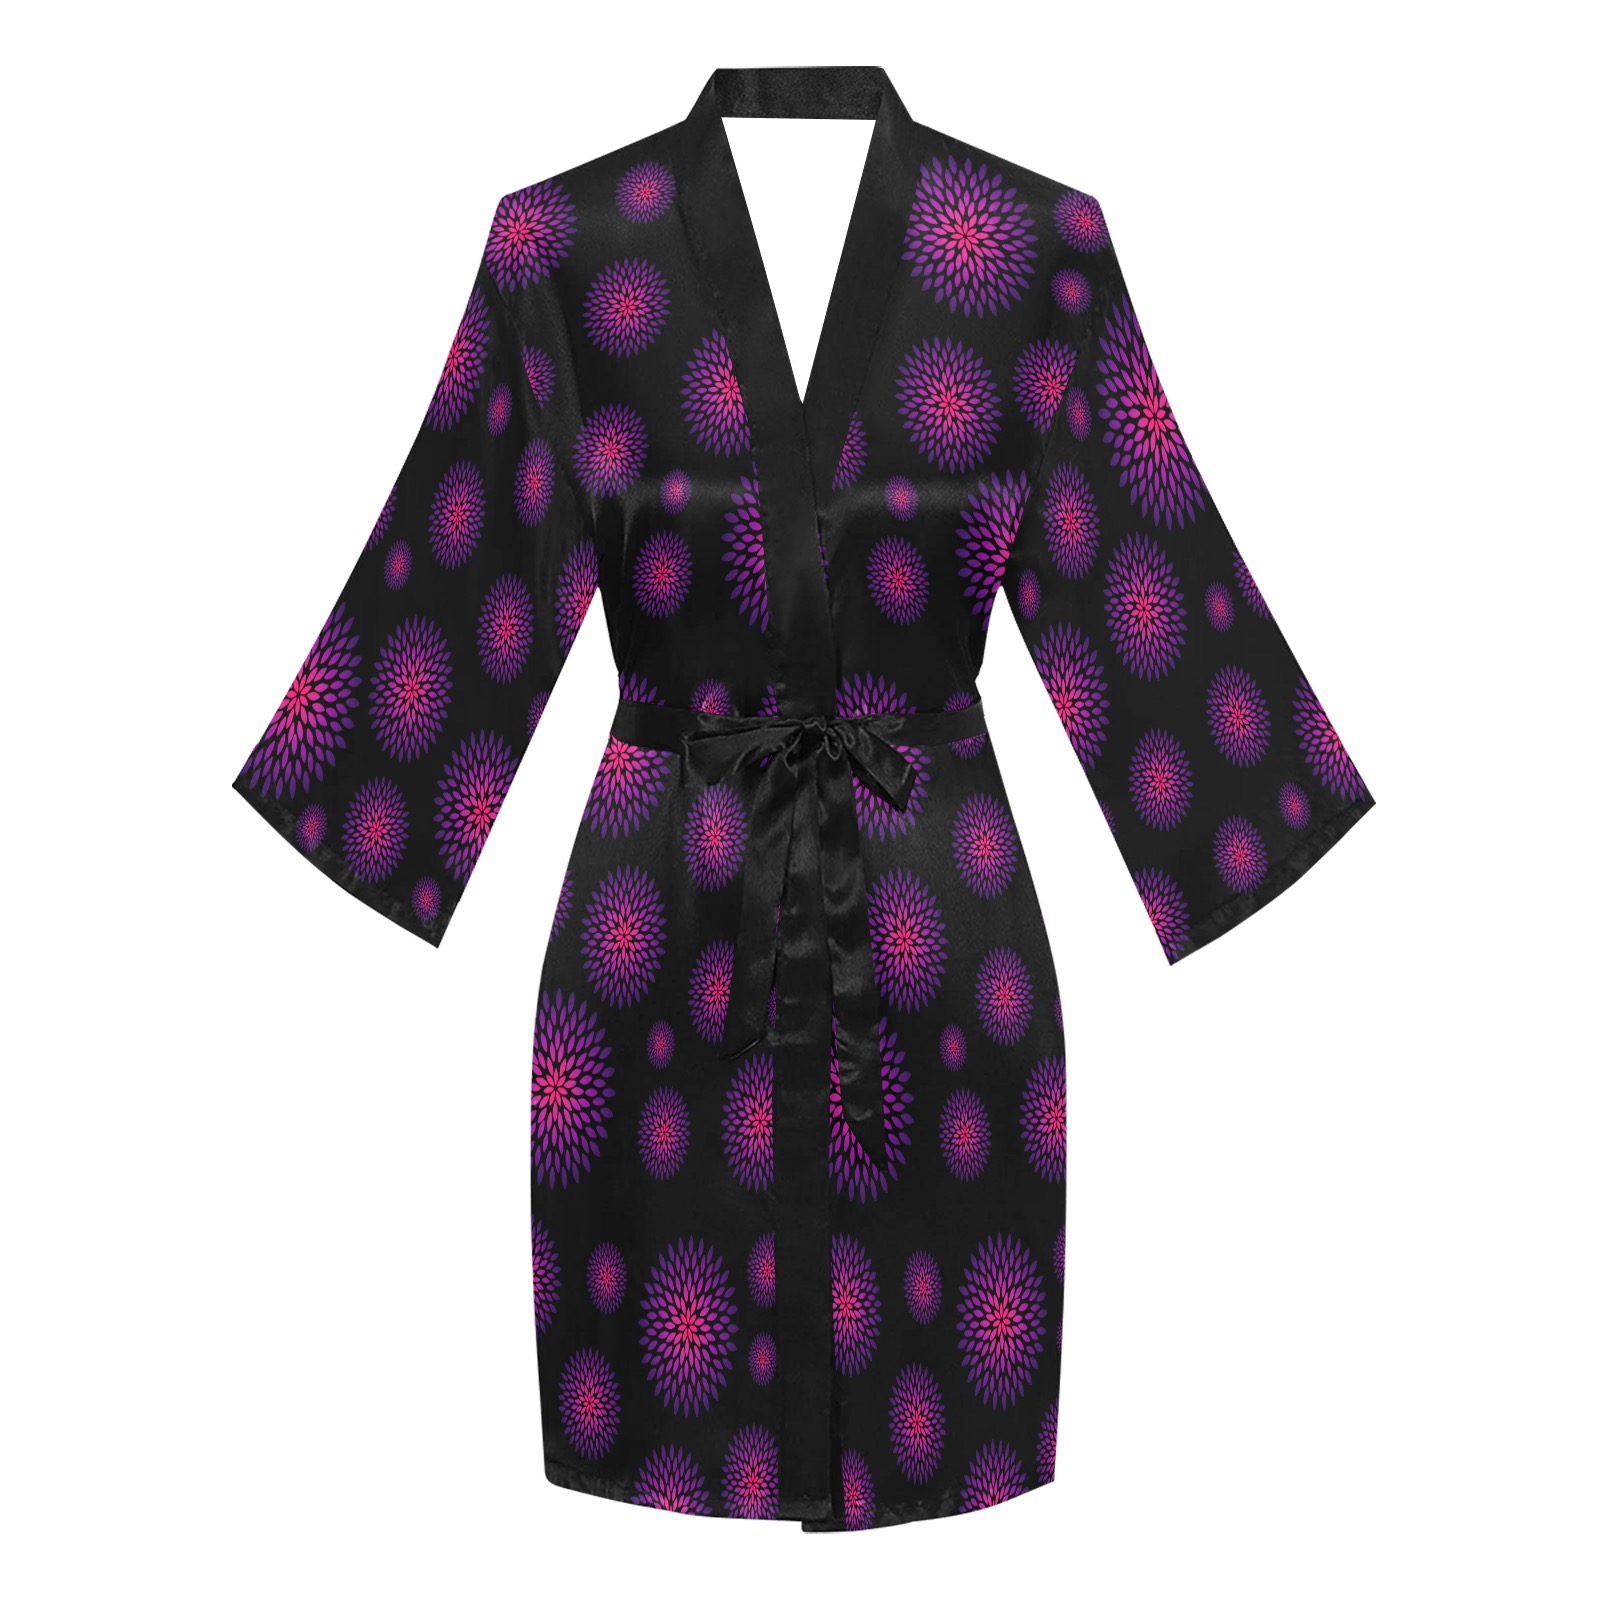 Ô Pink and Violet Zinnia Scatter on Black Long Sleeve Kimono Robe